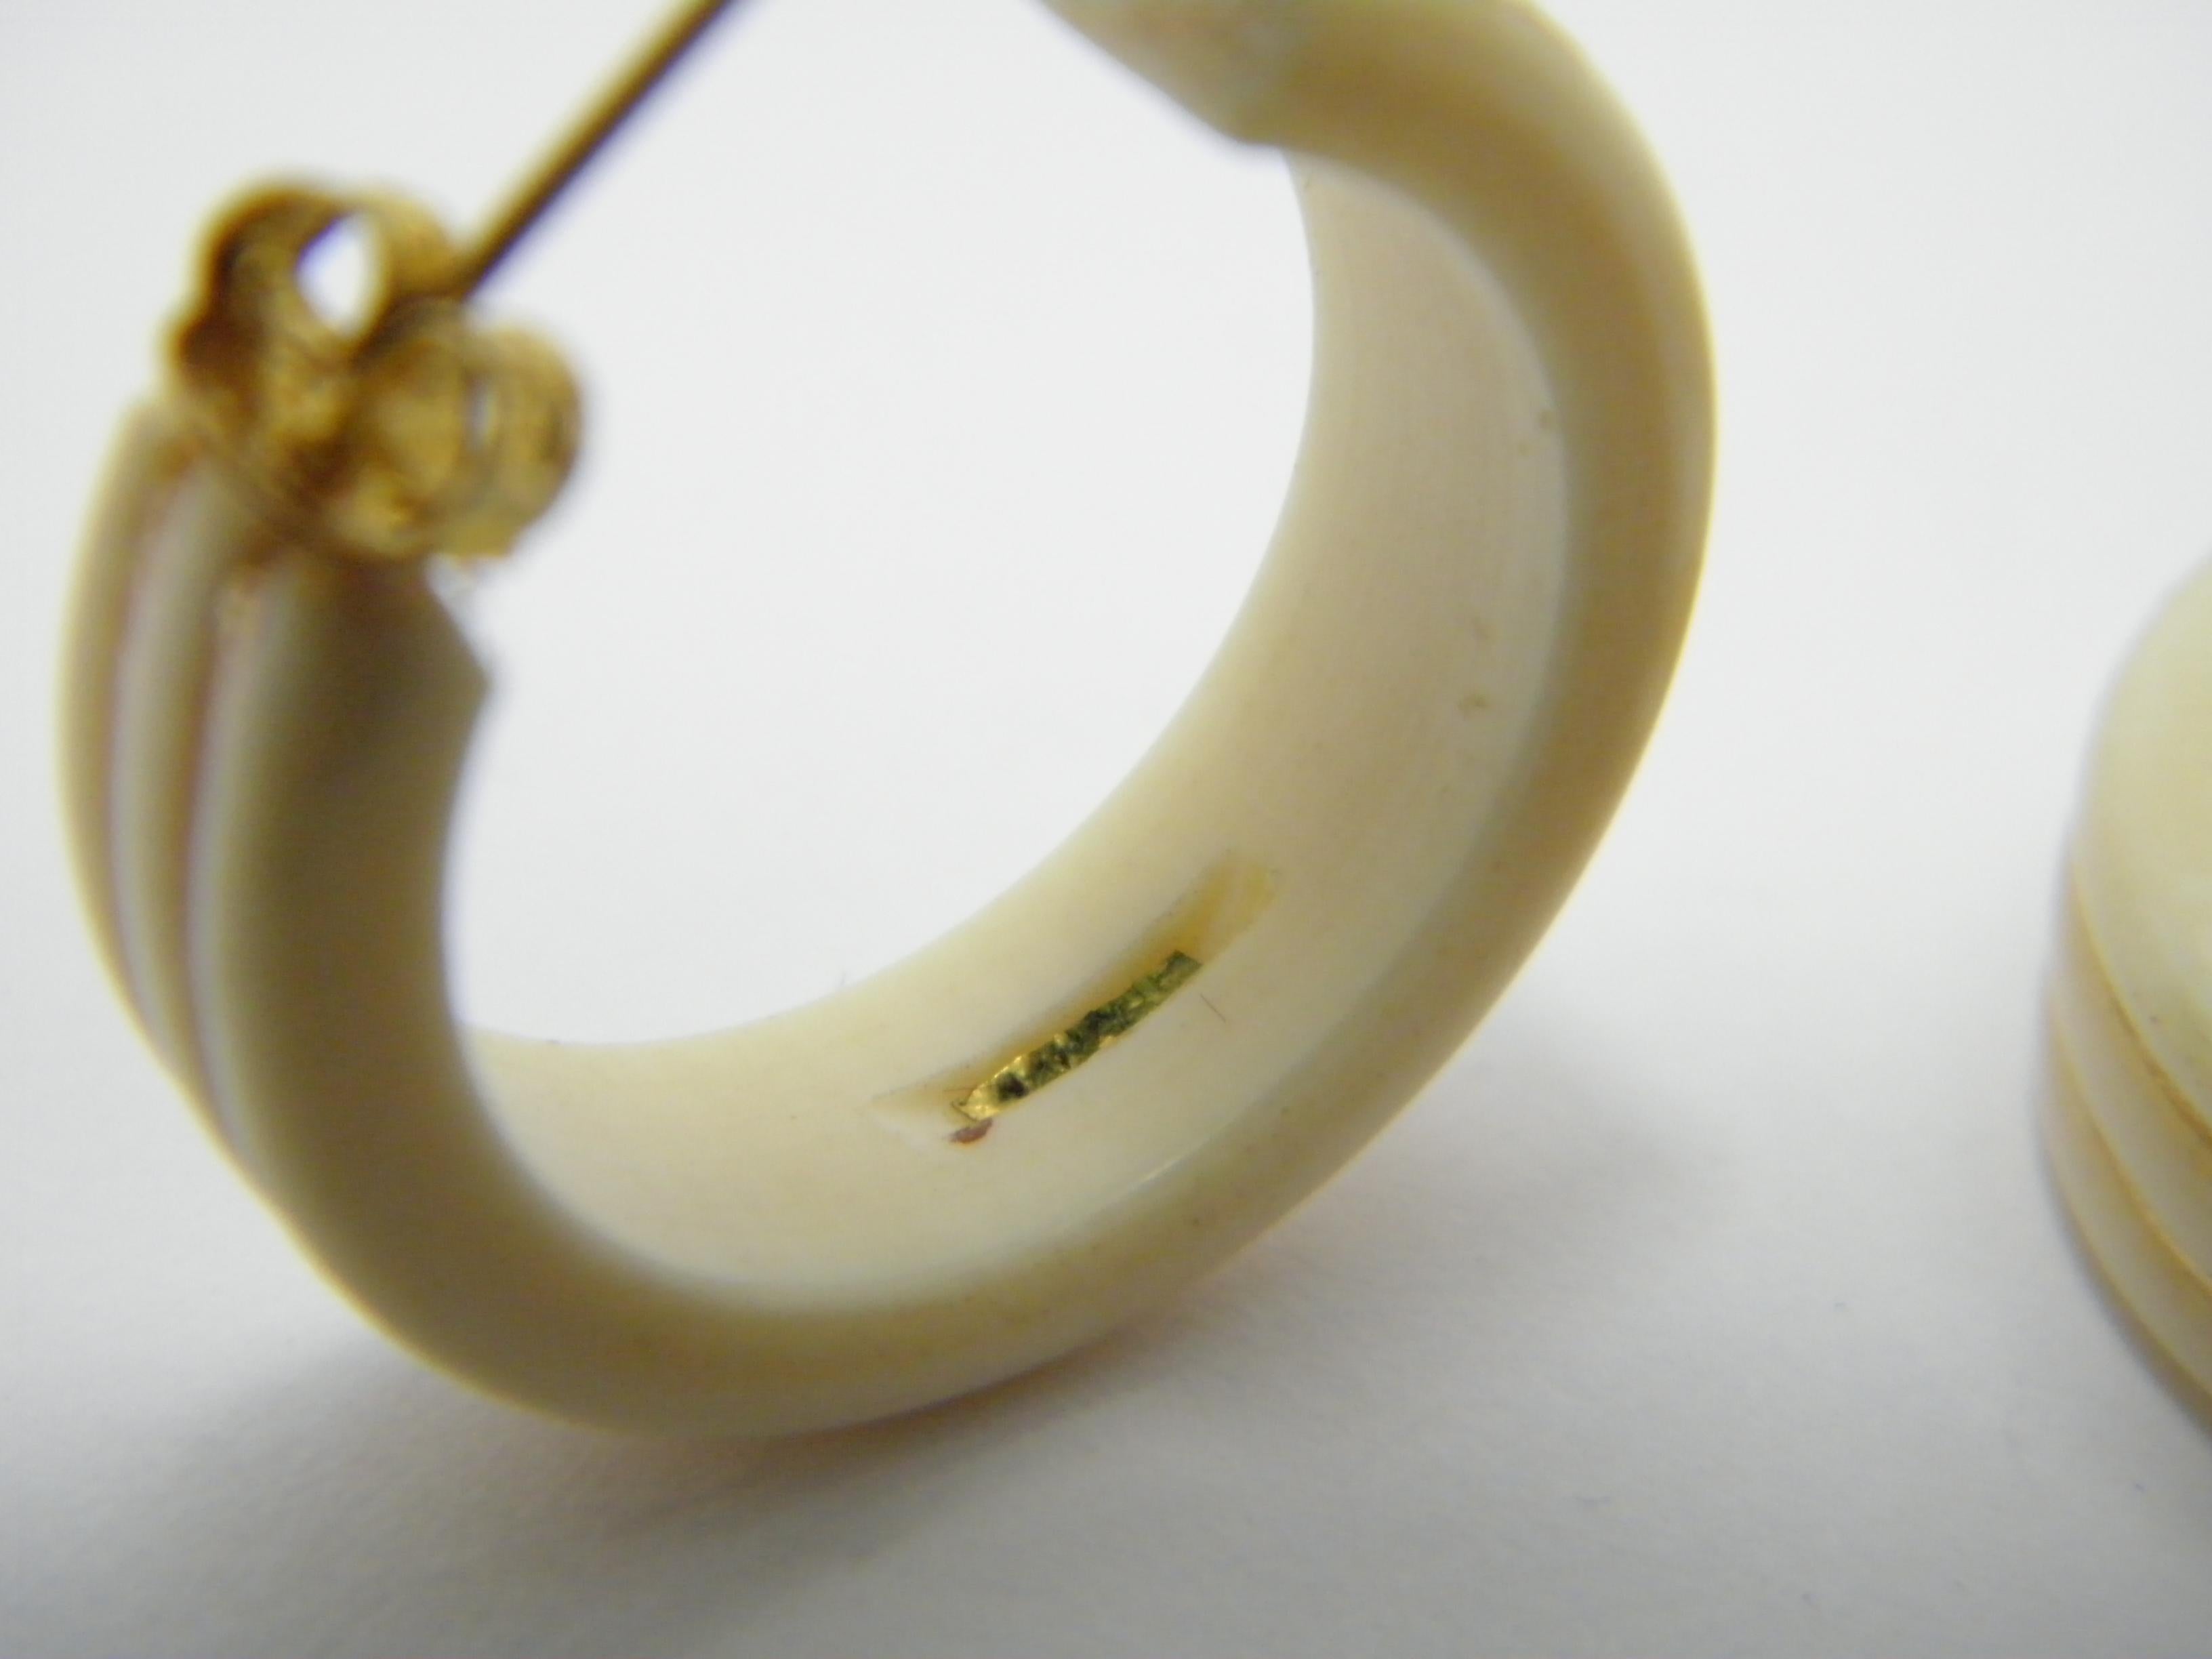 Vintage 14ct Gold Ox Bone Hoop / Stud Earrings 585 Purity Mourning In Good Condition For Sale In Camelford, GB